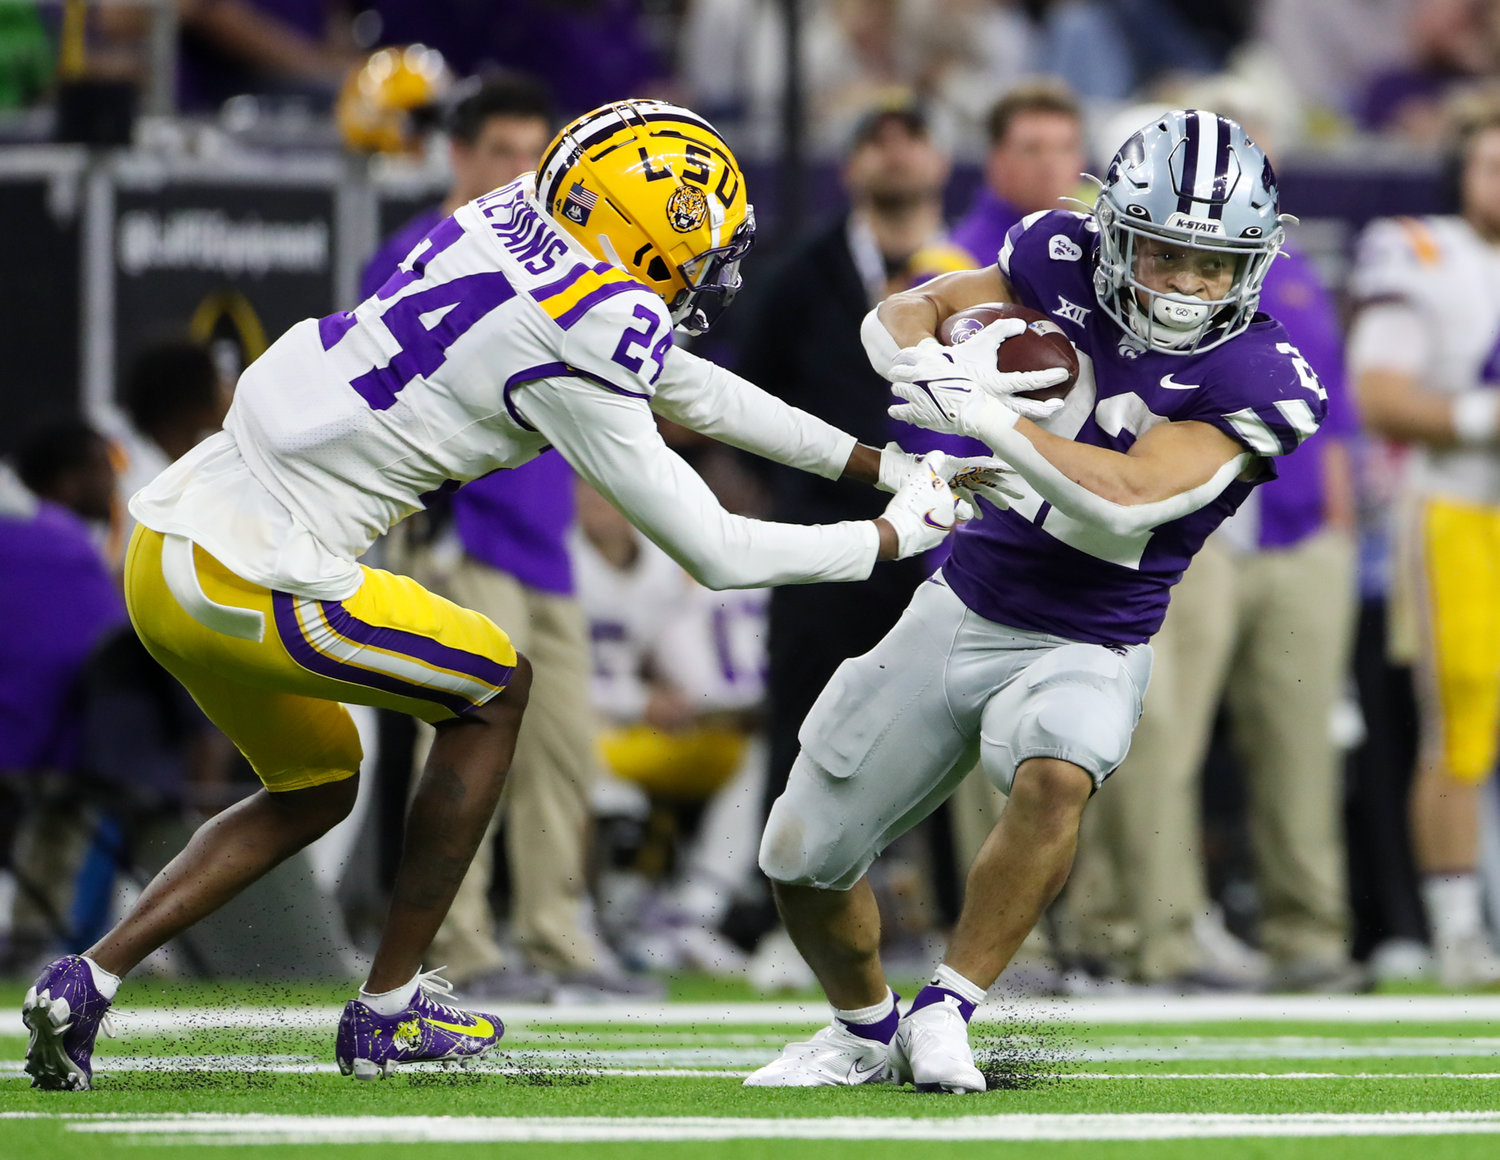 Kansas State Wildcats running back Deuce Vaughn (22) carries the ball for 48 yards during the TaxAct Texas Bowl on Jan. 4, 2022 in Houston, Texas.